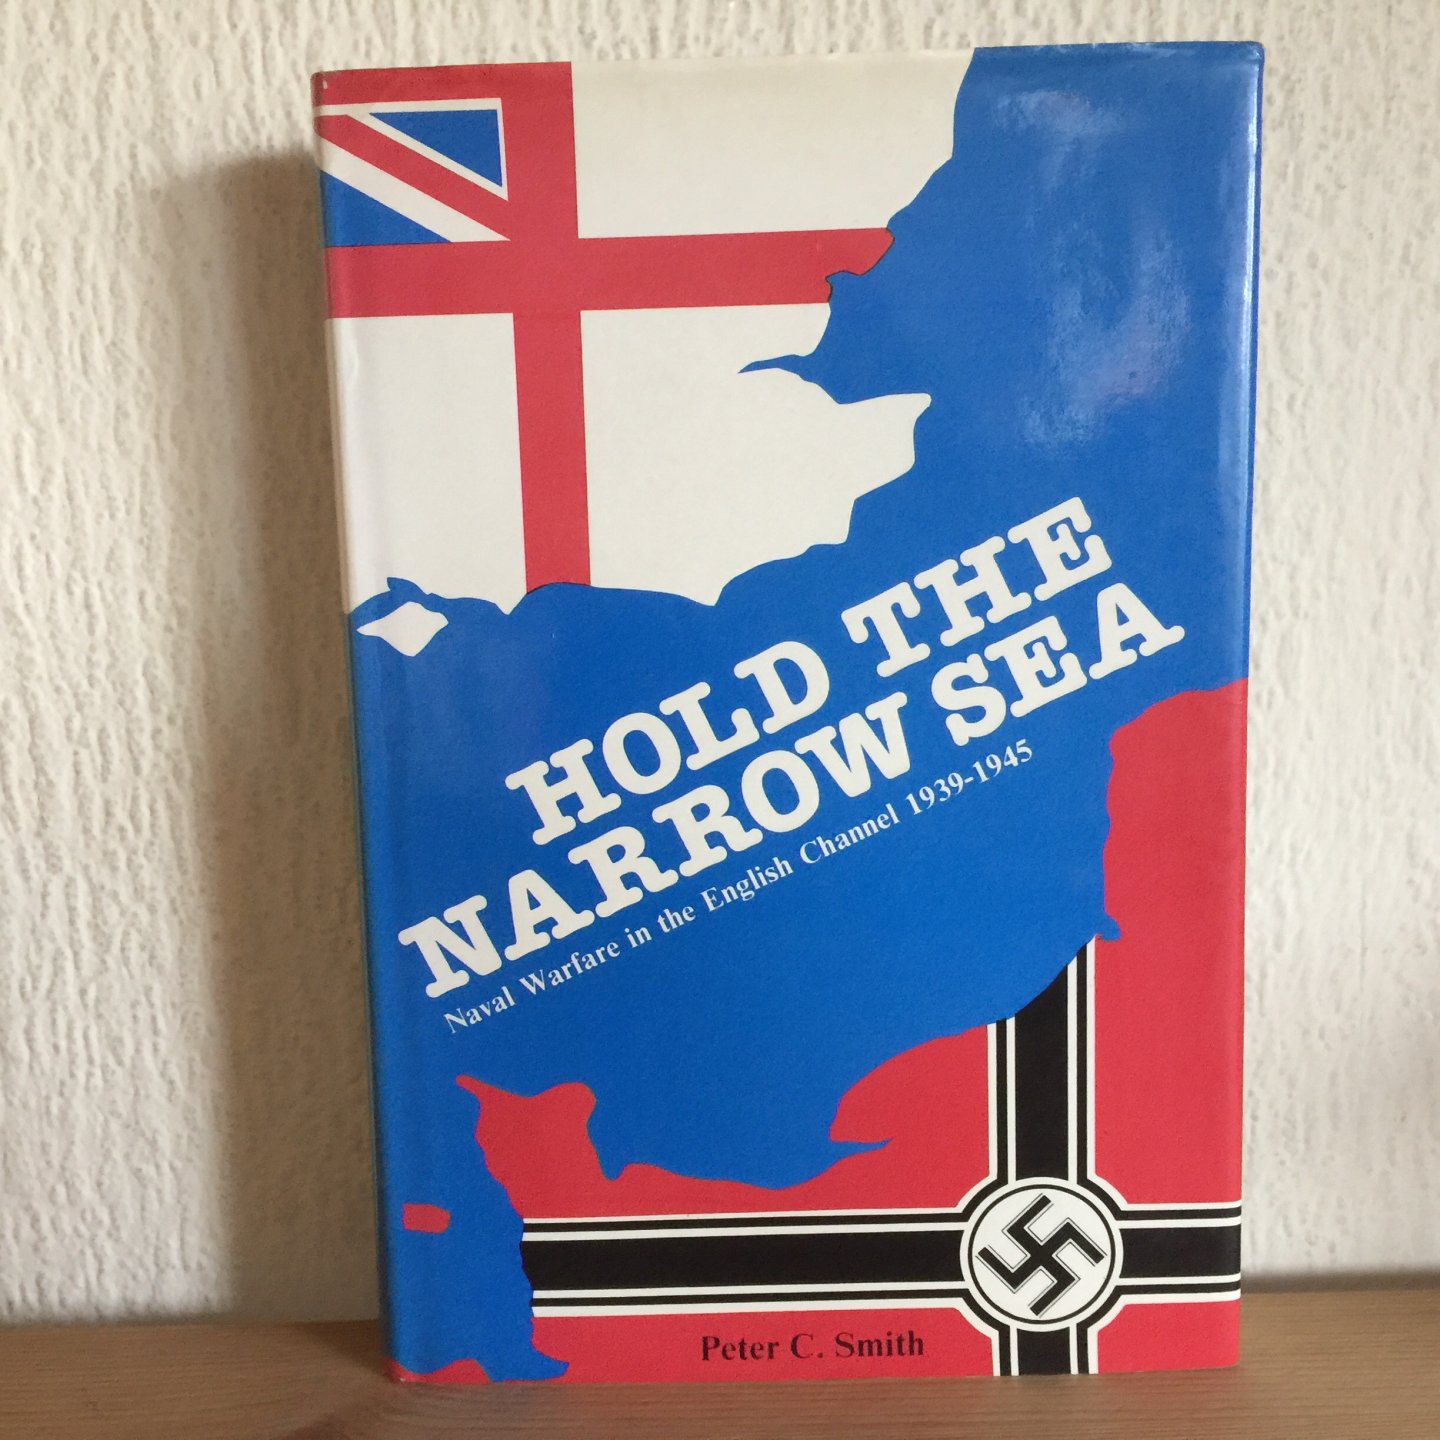 Peter C Smith - Hold the Narrow Sea, Naval Warface in the English Channel 1939-1945